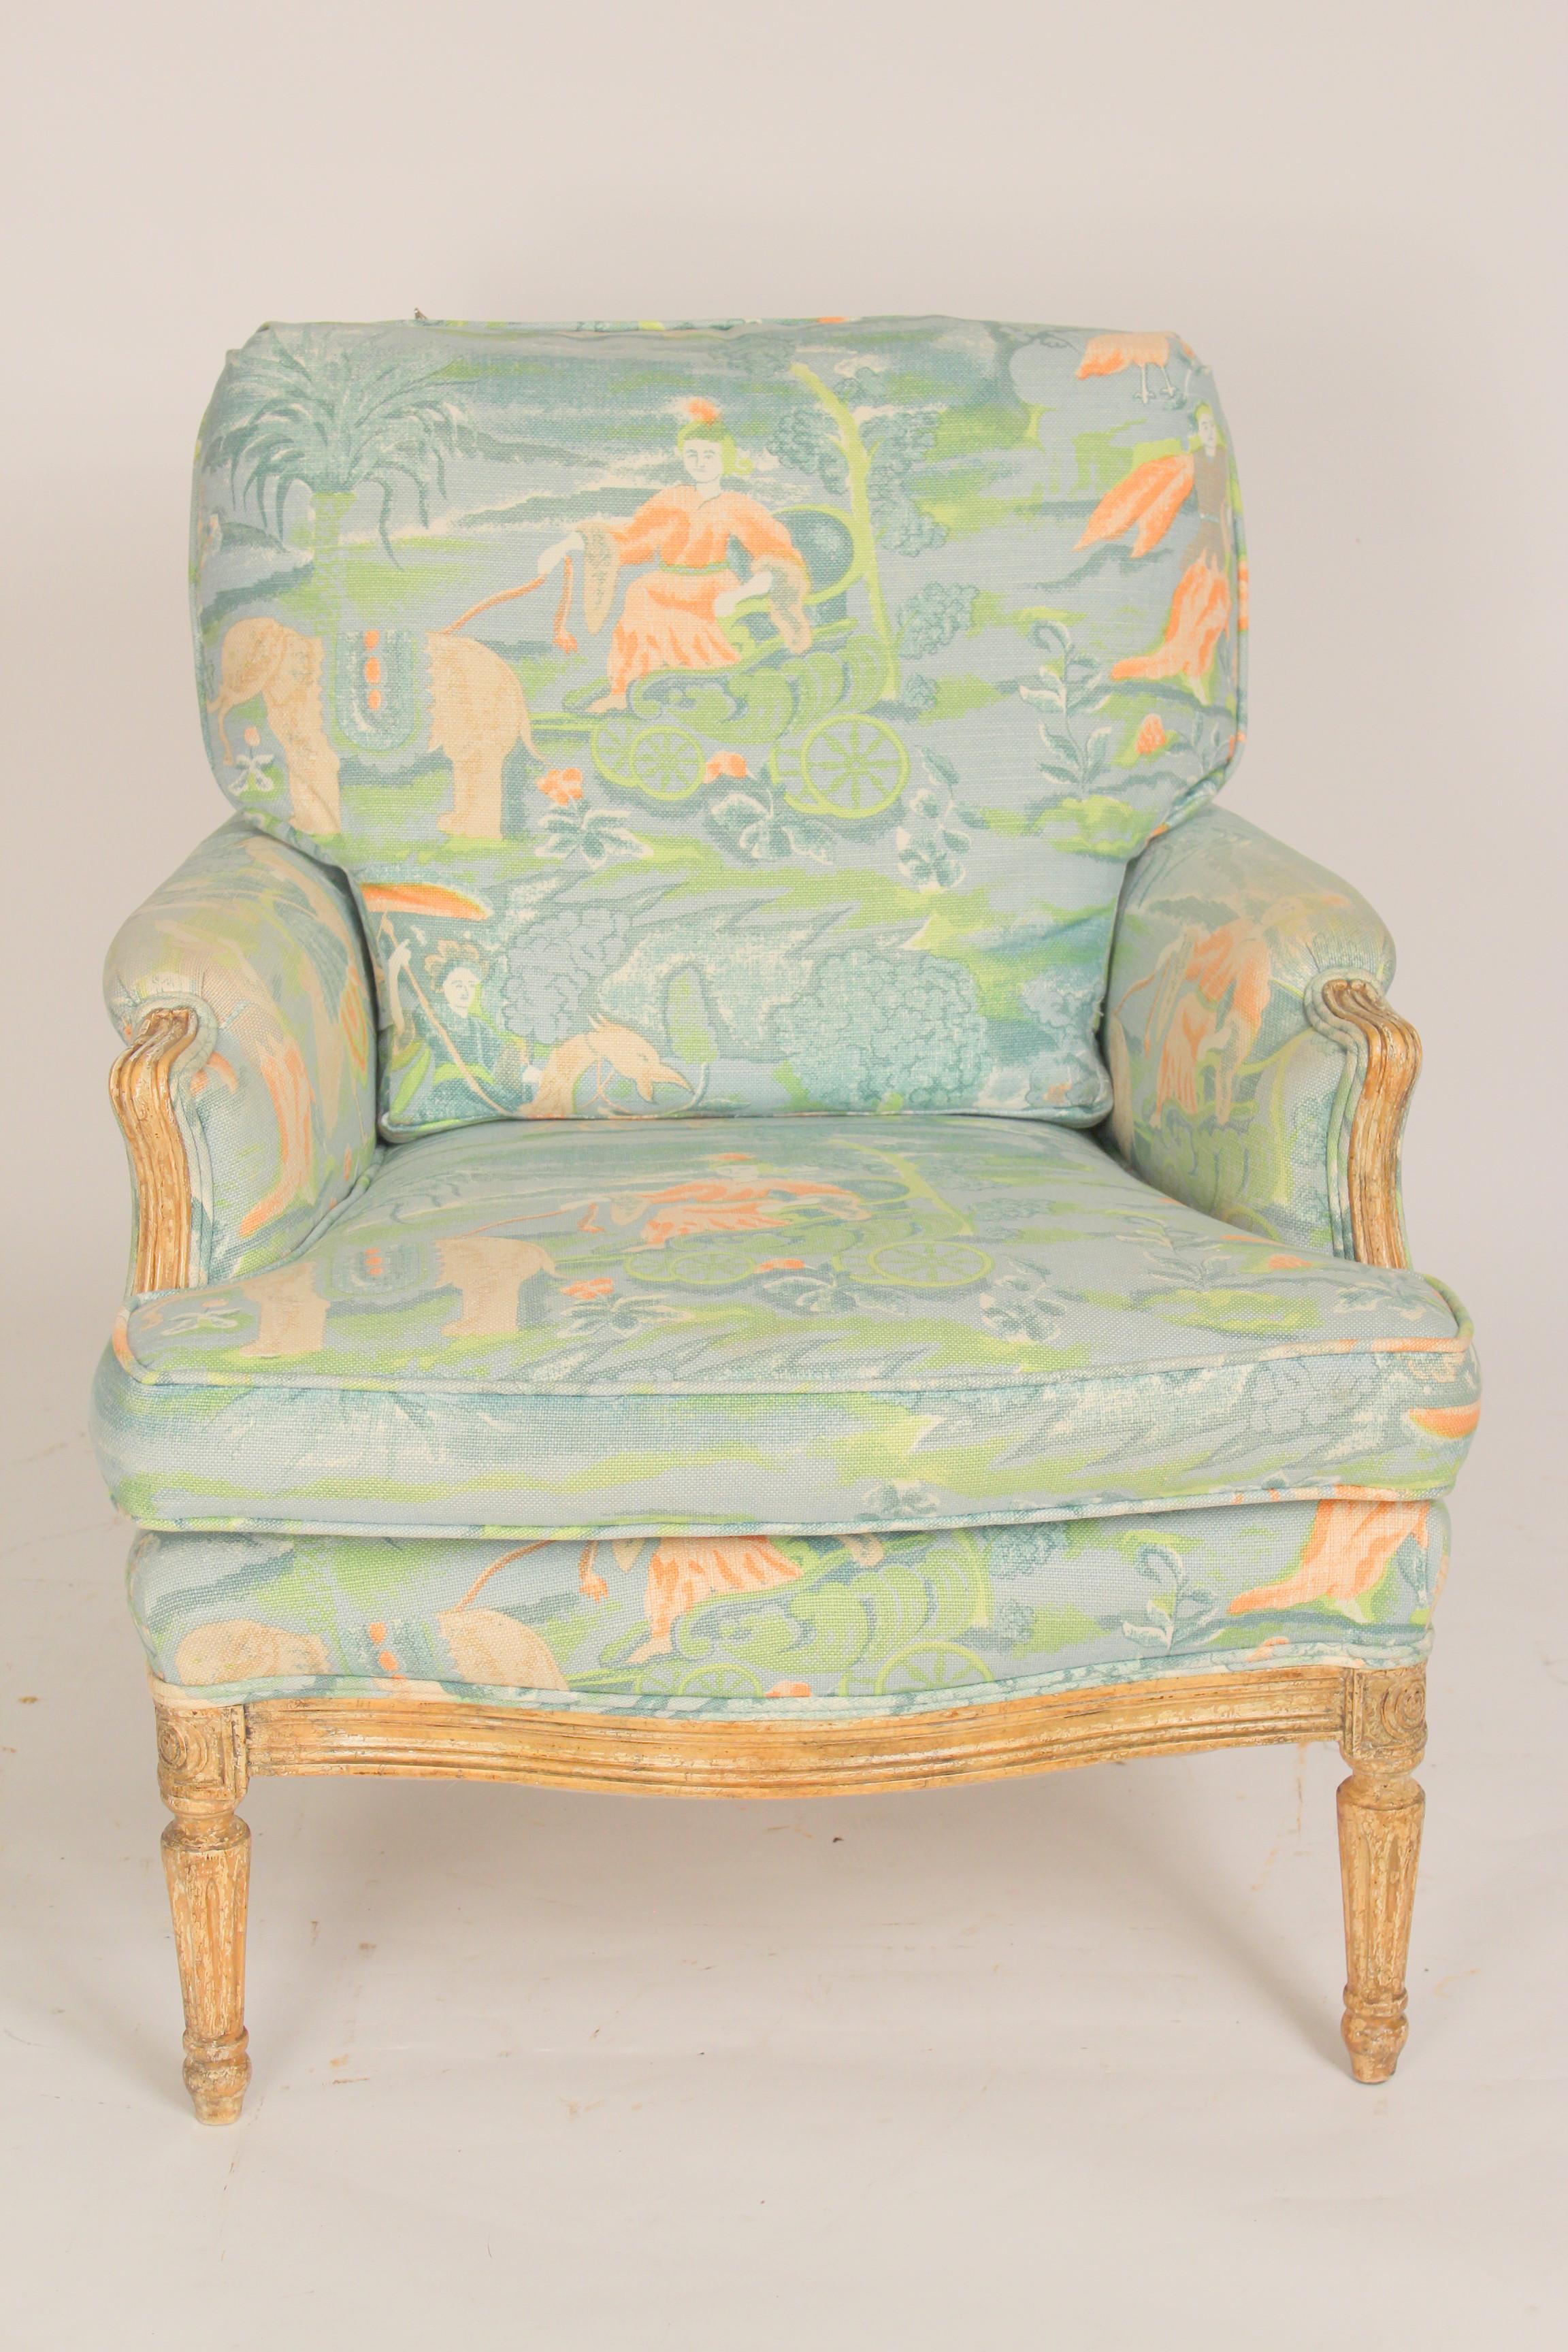 Louis XVI style bleached wood and painted bergere, late 20th century. Exotic Asian Style upholstery. Back cushion is down filled. This chair has a deep seat and is comfortable to sit in.